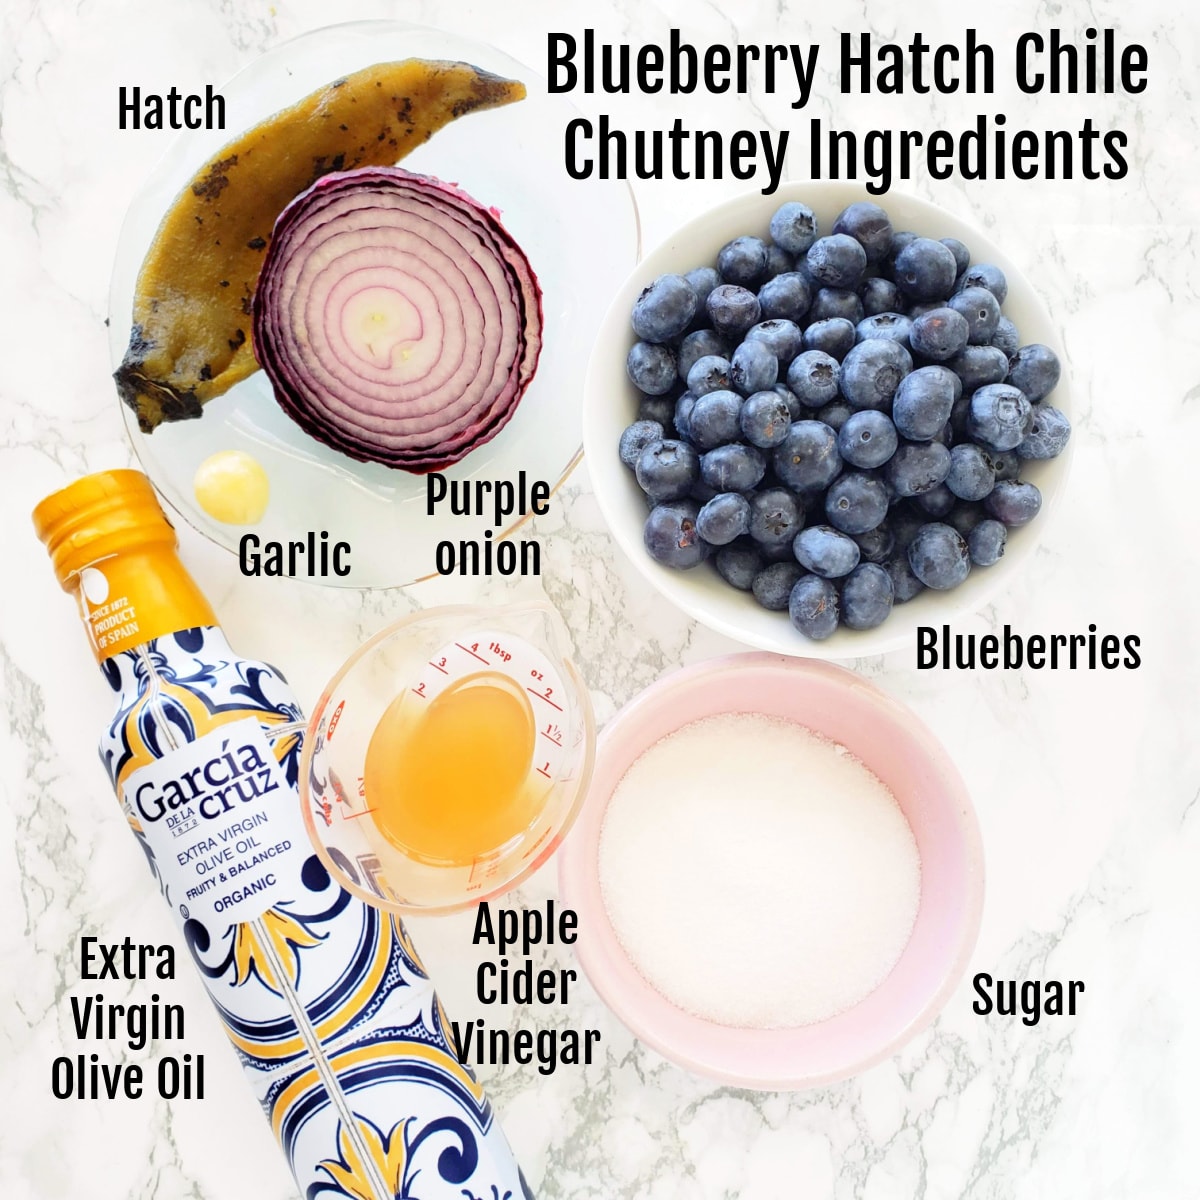 Ingredients for Blueberry Hatch Chile Chutney laid out on a white marble counter with each ingredient labeled